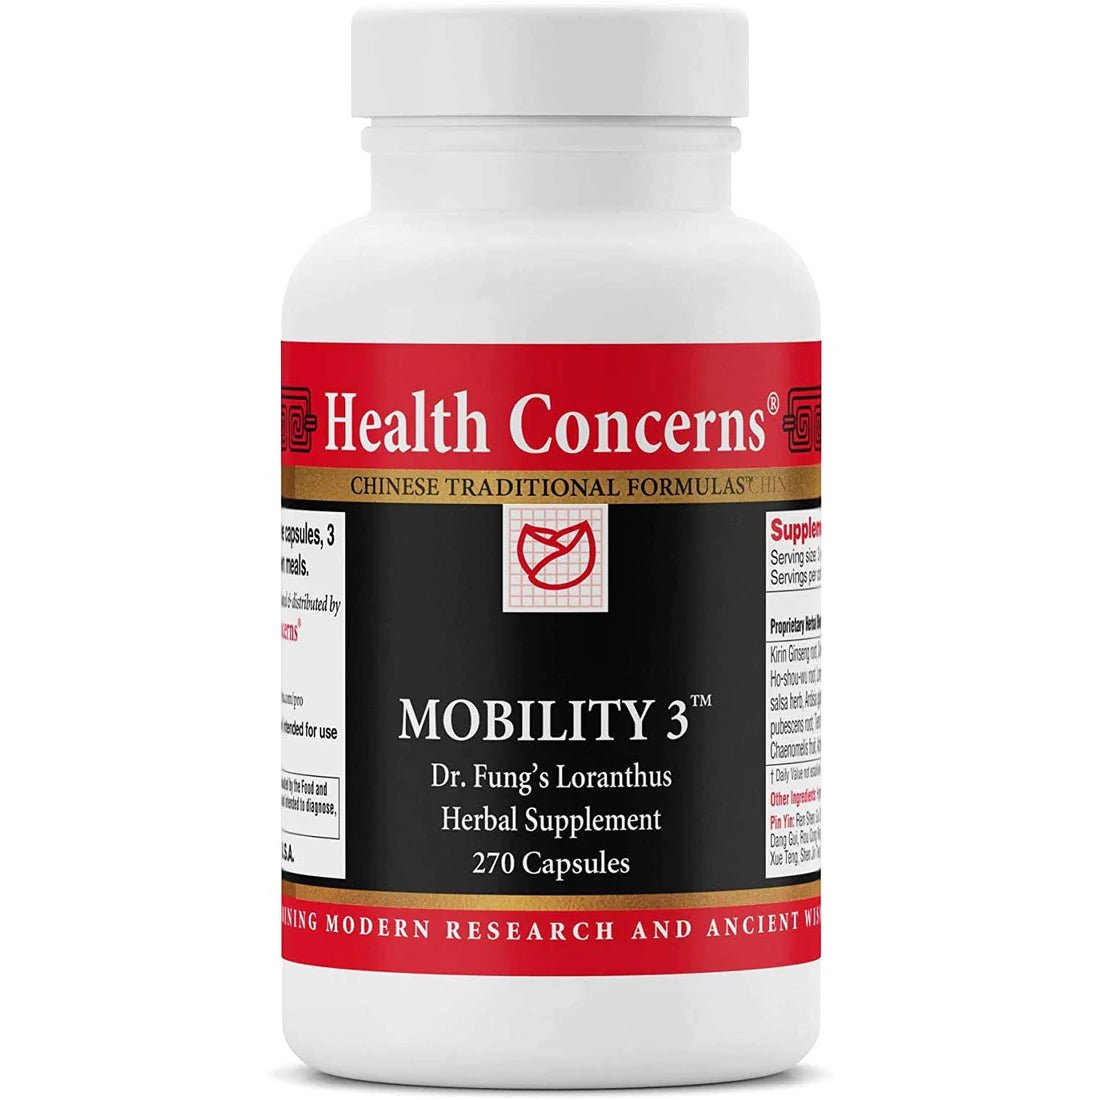 Health Concerns Mobility 3 - Accelerated Health Products